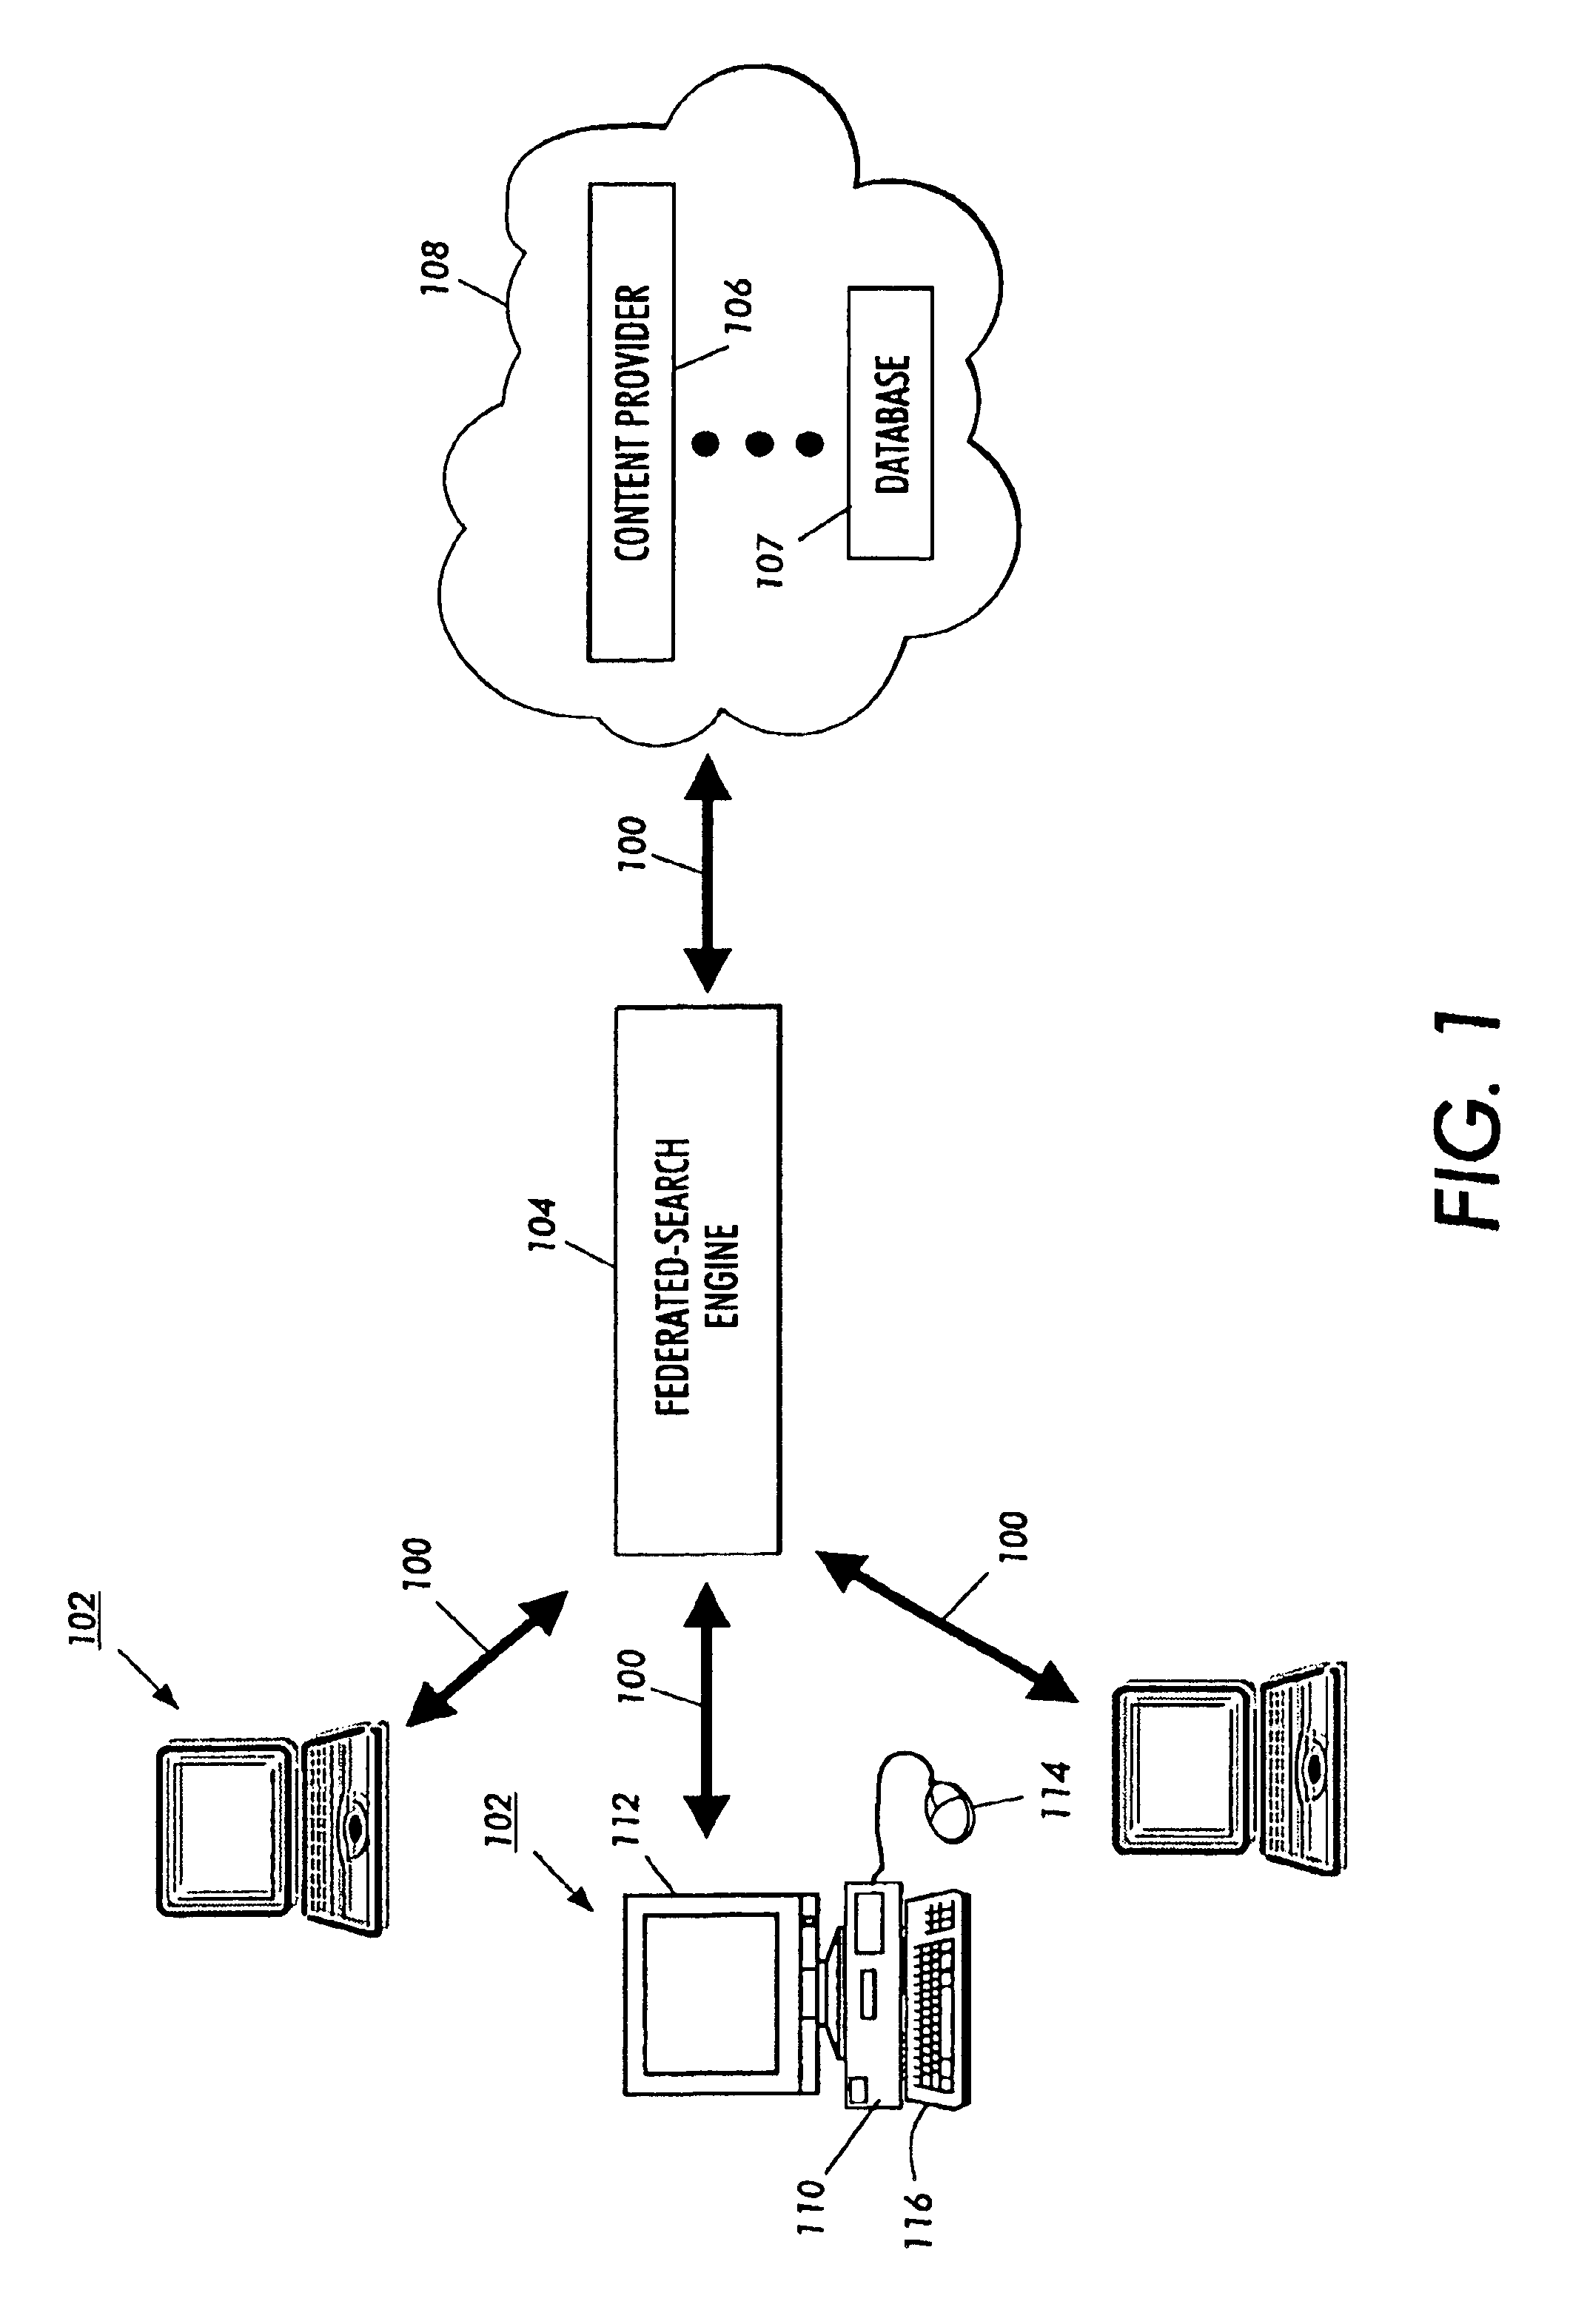 Structured contextual clustering method and system in a federated search engine